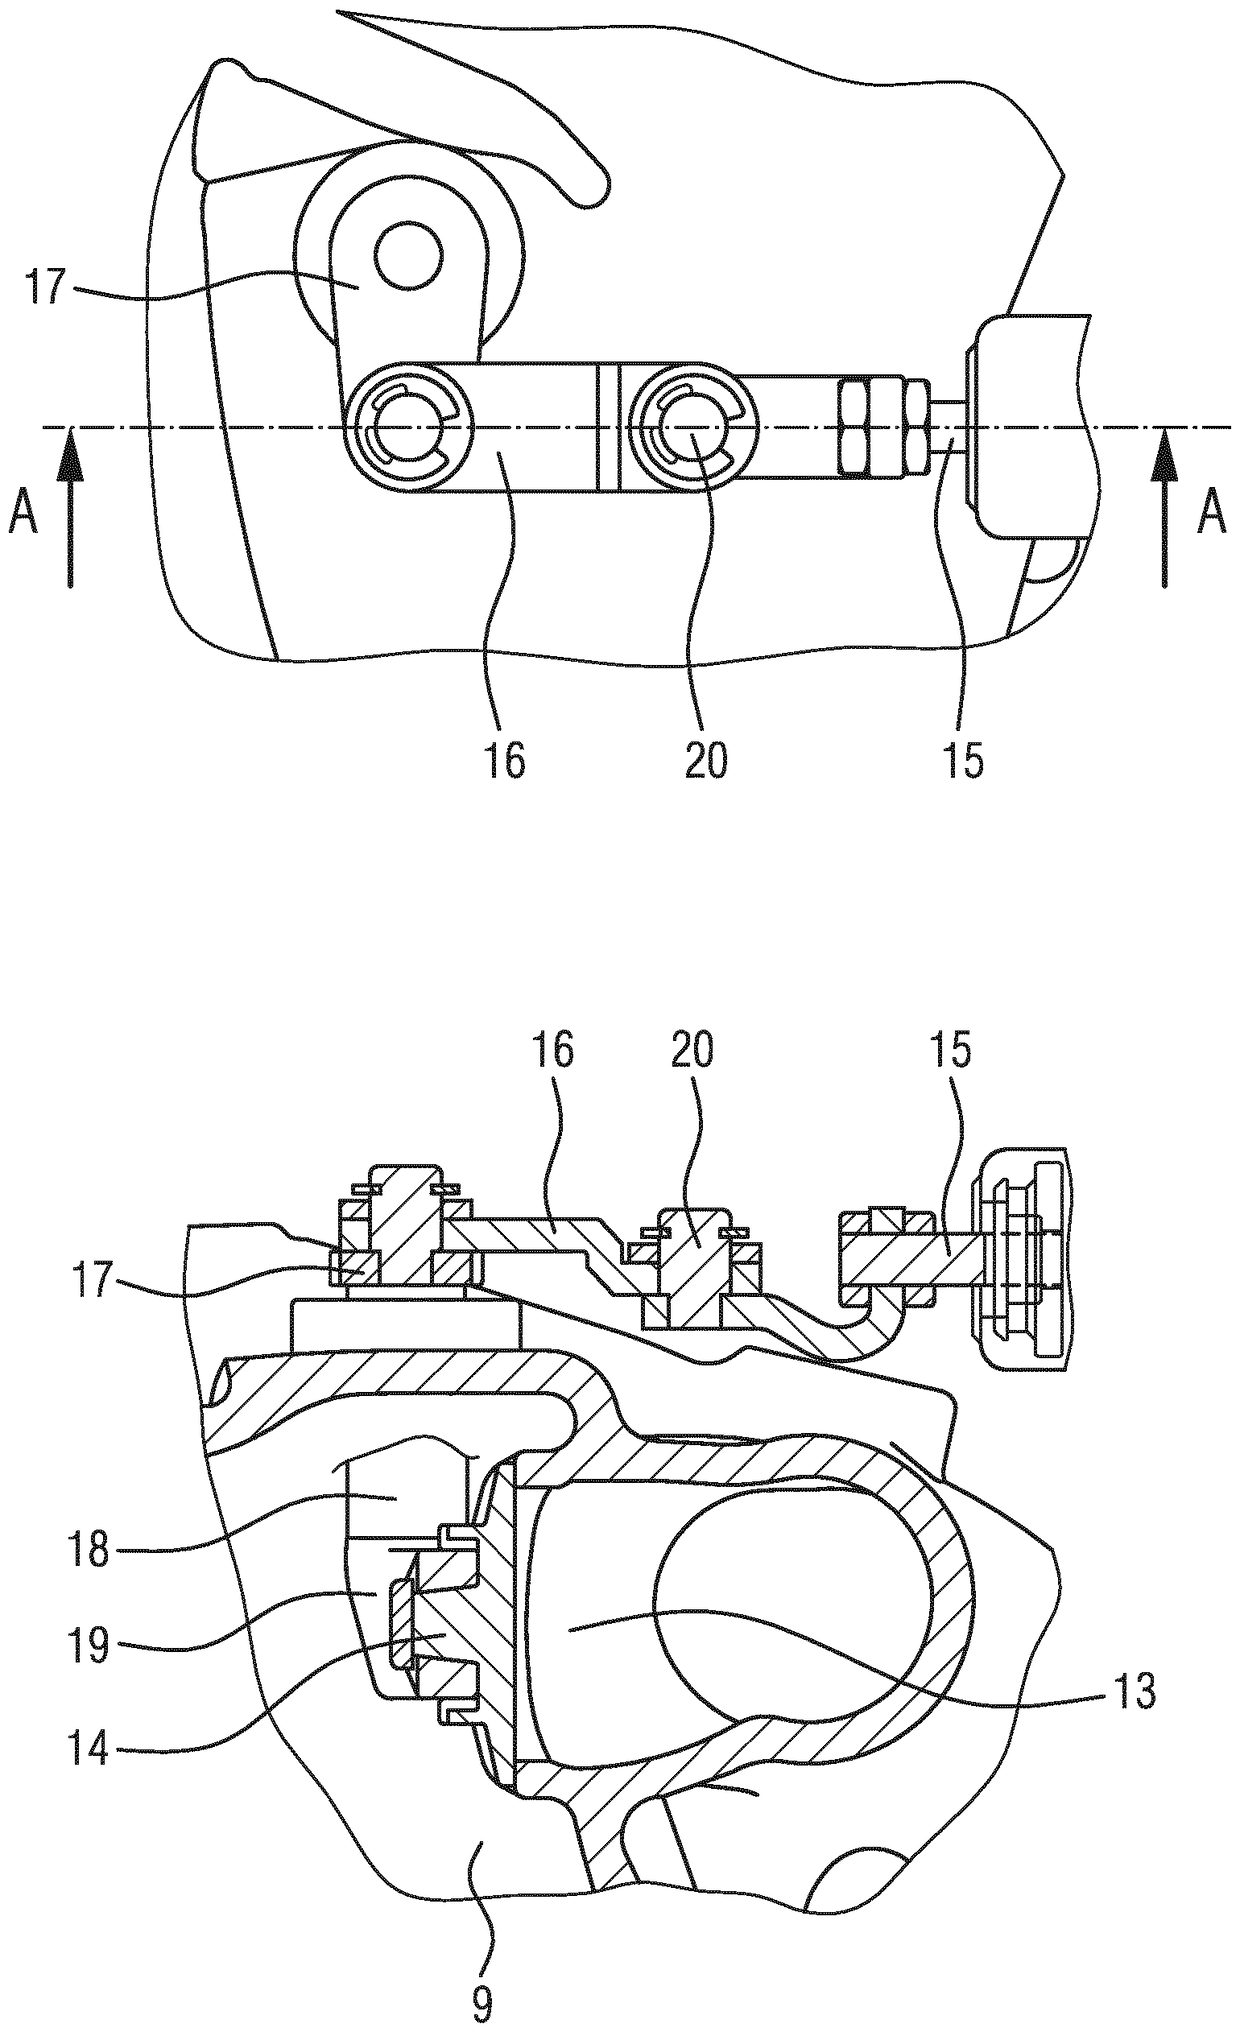 Turbine for an exhaust turbocharger having a two-volute turbine housing and a linear valve for volute connection and wastegate control